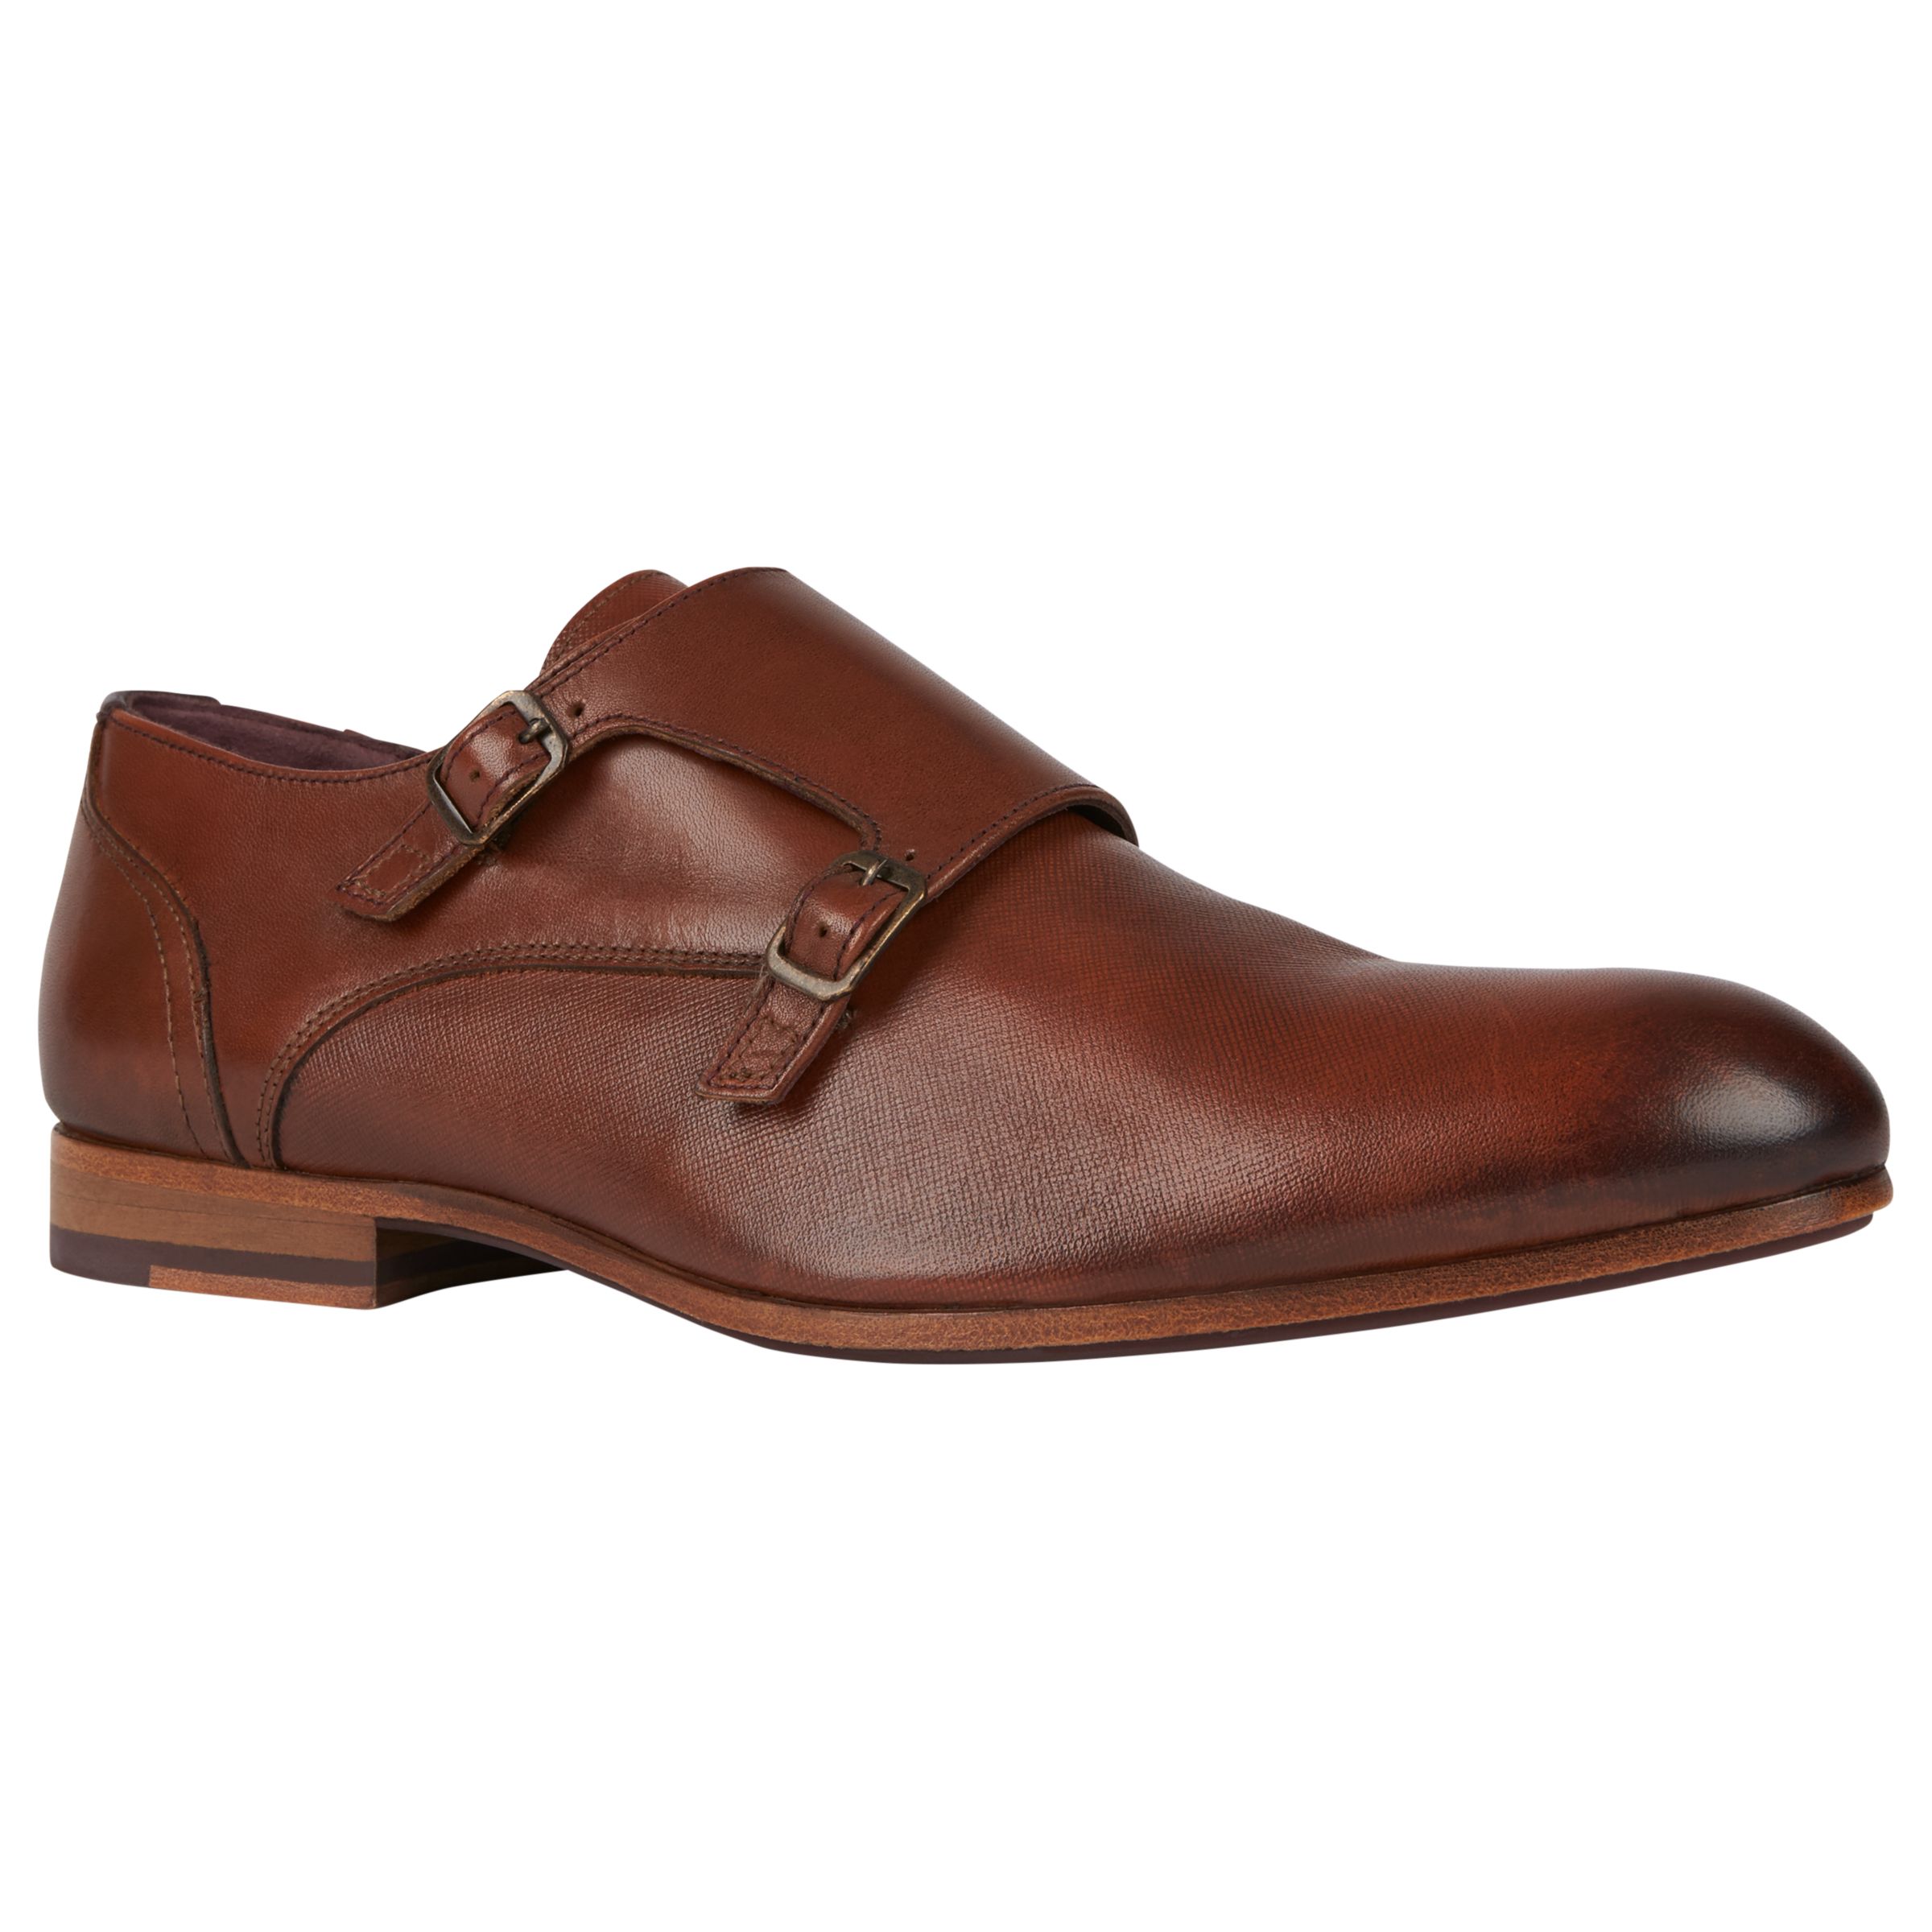 Ted Baker Valath Monk Strap Shoes, Tan